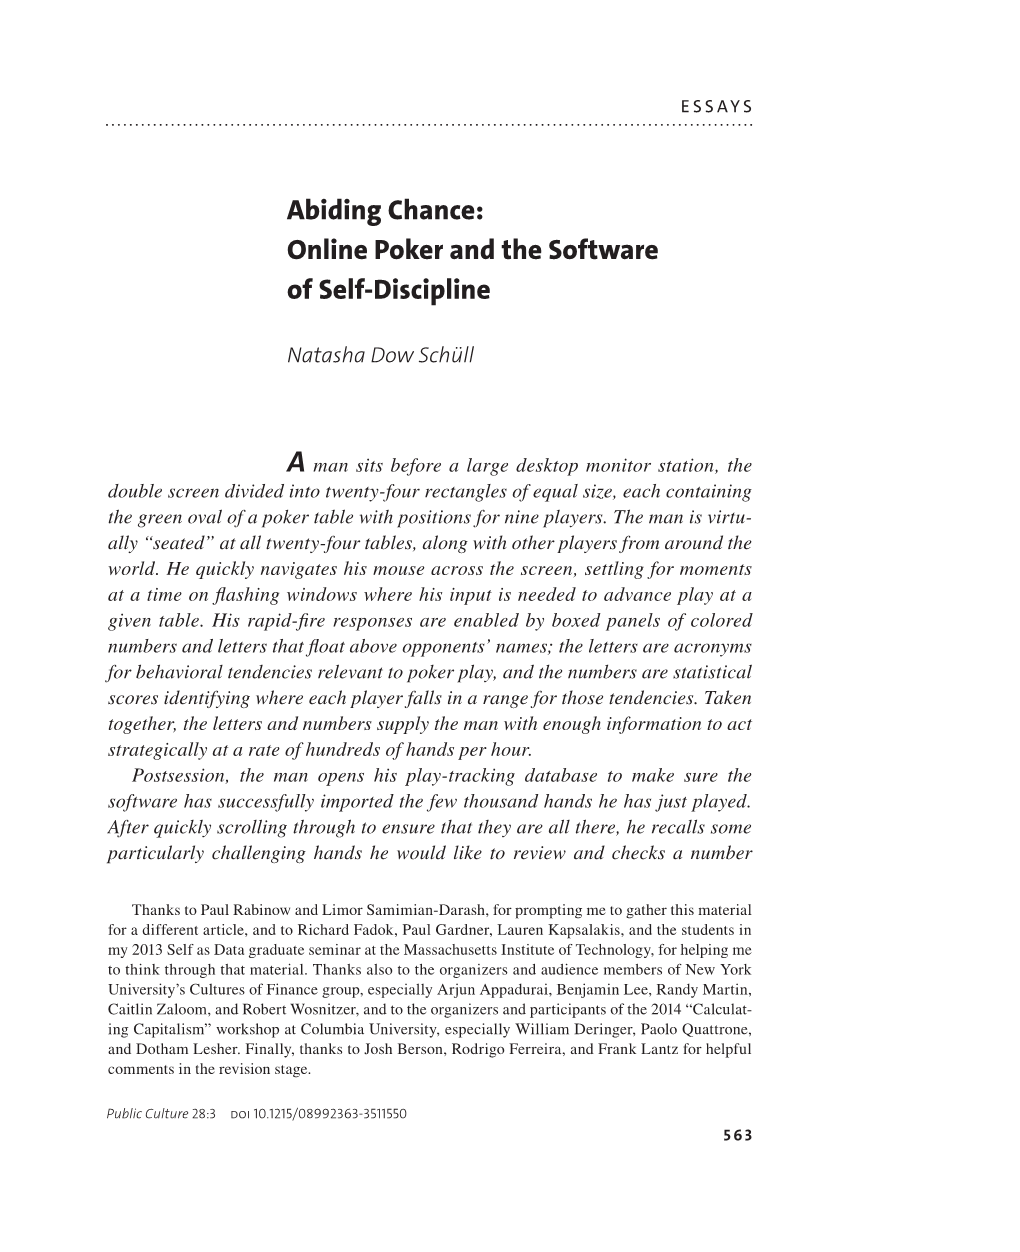 Abiding Chance: Online Poker and the Software of Self-Discipline